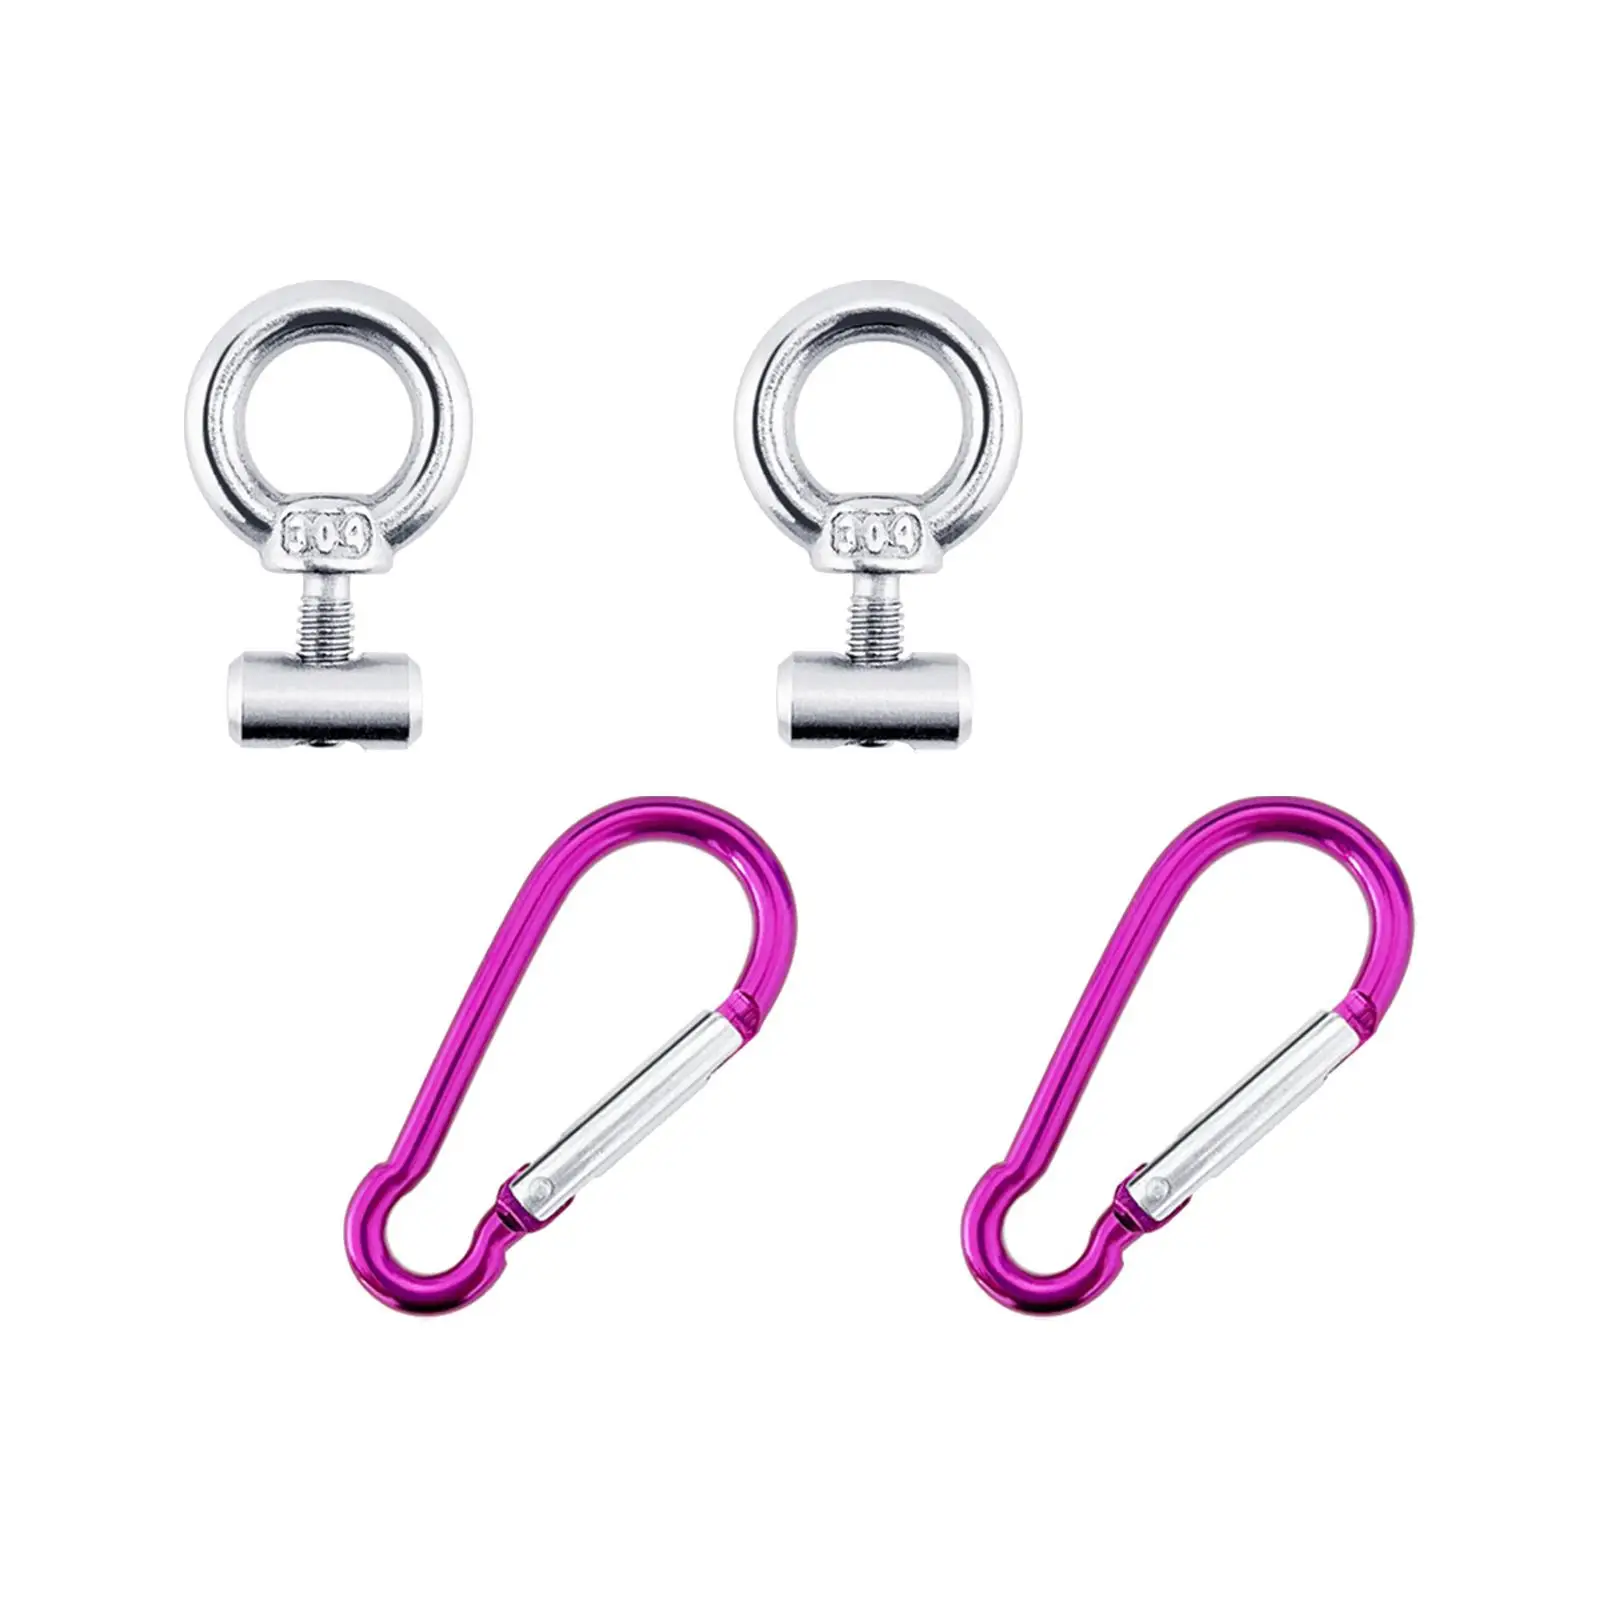 Carabiners Clips Supplies M4 Lifting Eye Nuts for Awning Rail Track RV